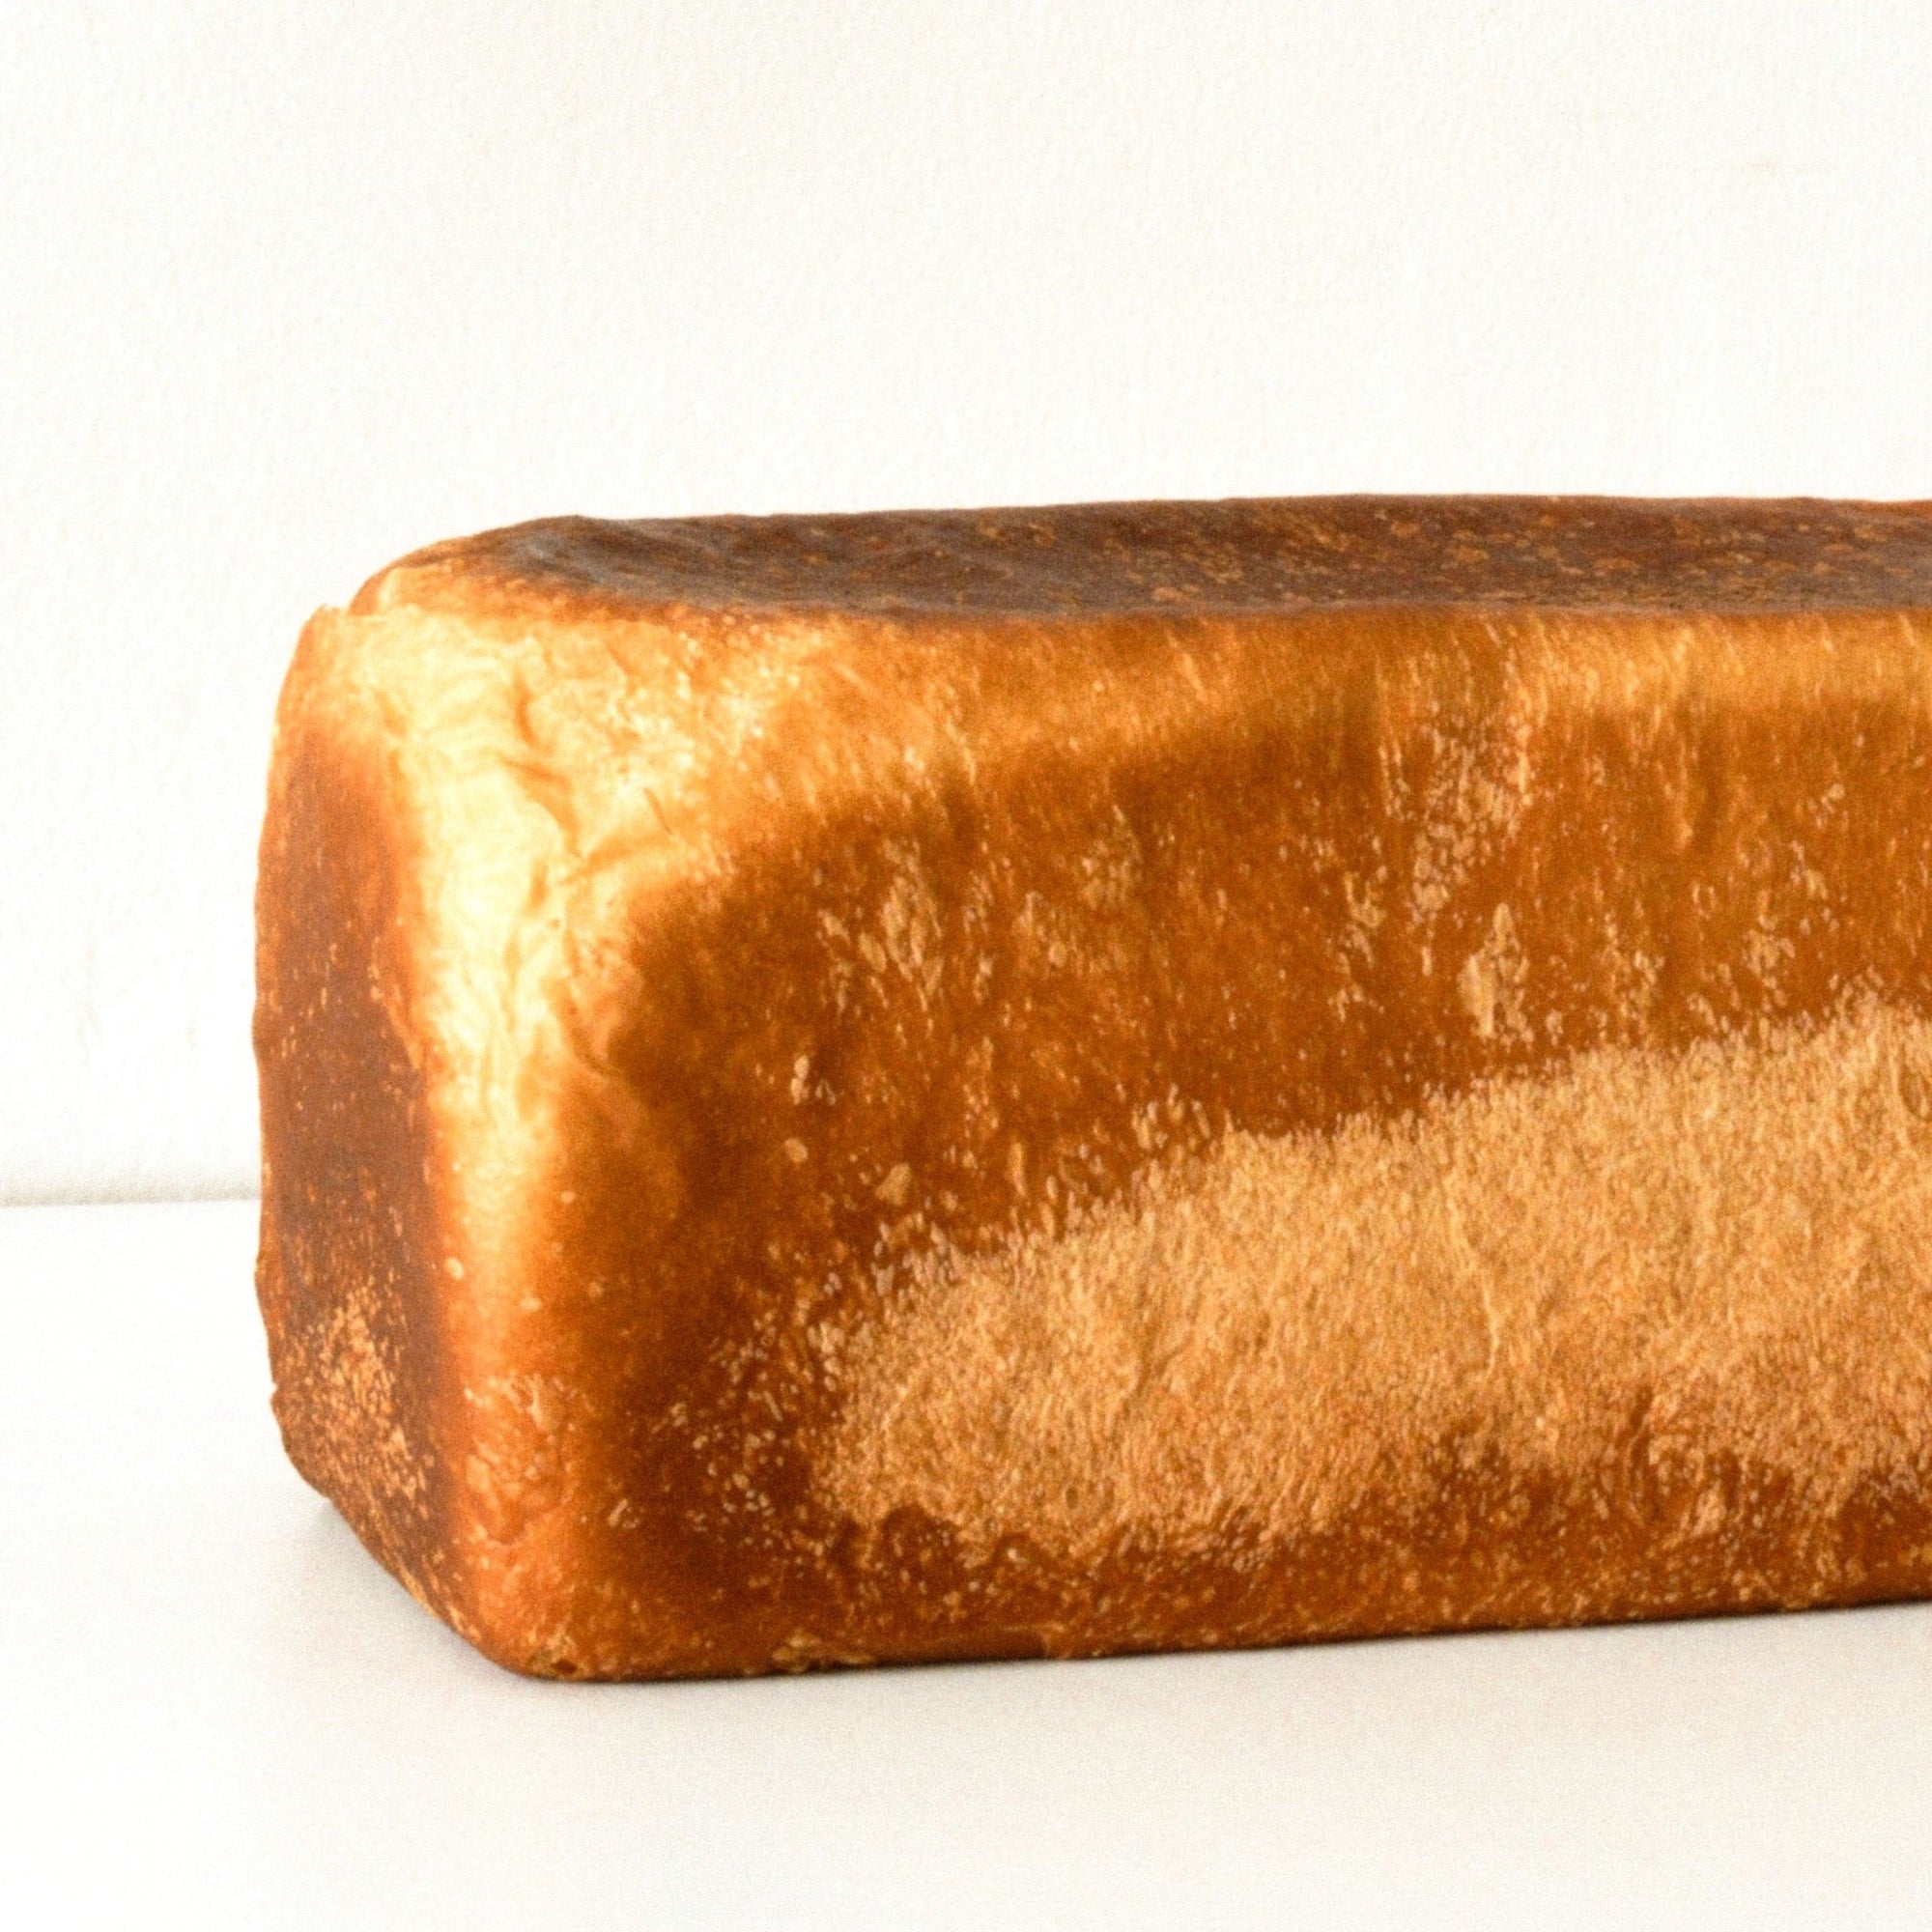 close up image of a golden brown white loaf